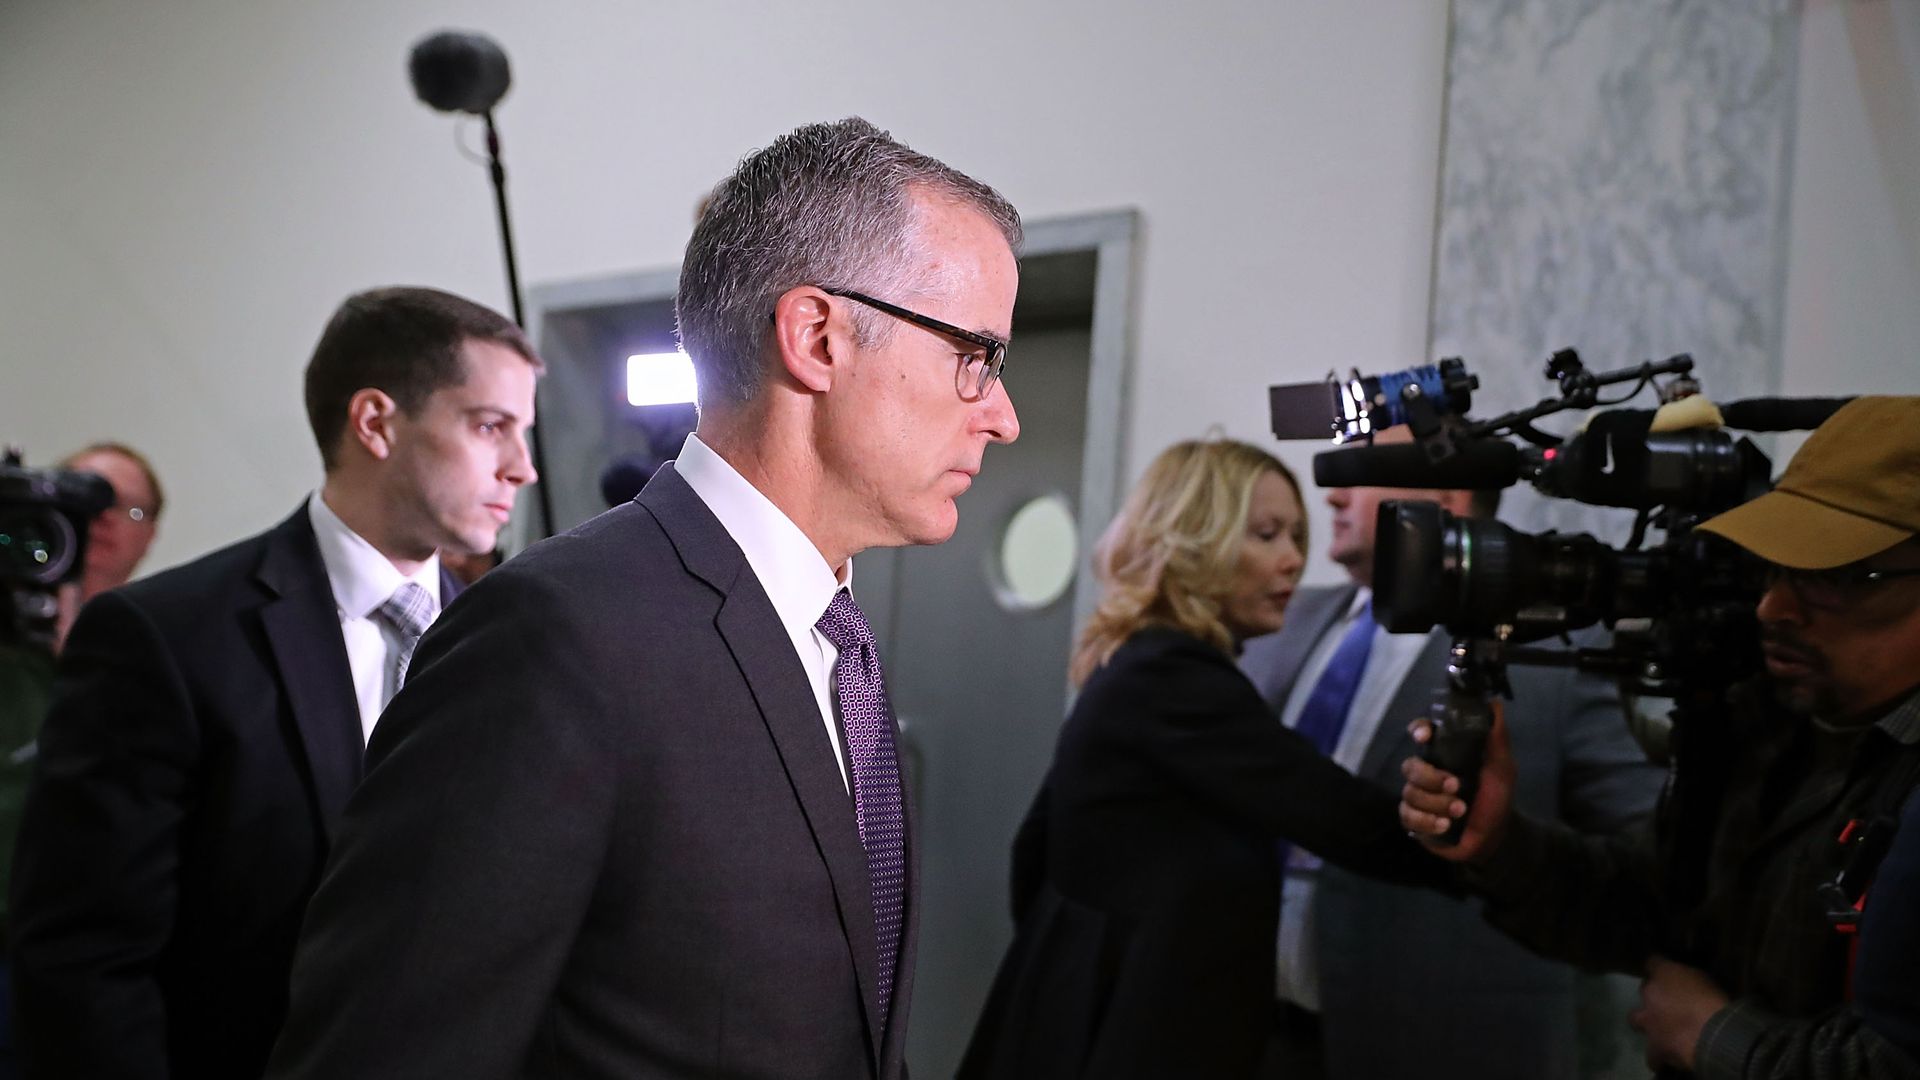 In this image, Andrew McCabe is escorted by a security guard through a light gray hallway in the Rayburn House office building. News cameras follow him. 